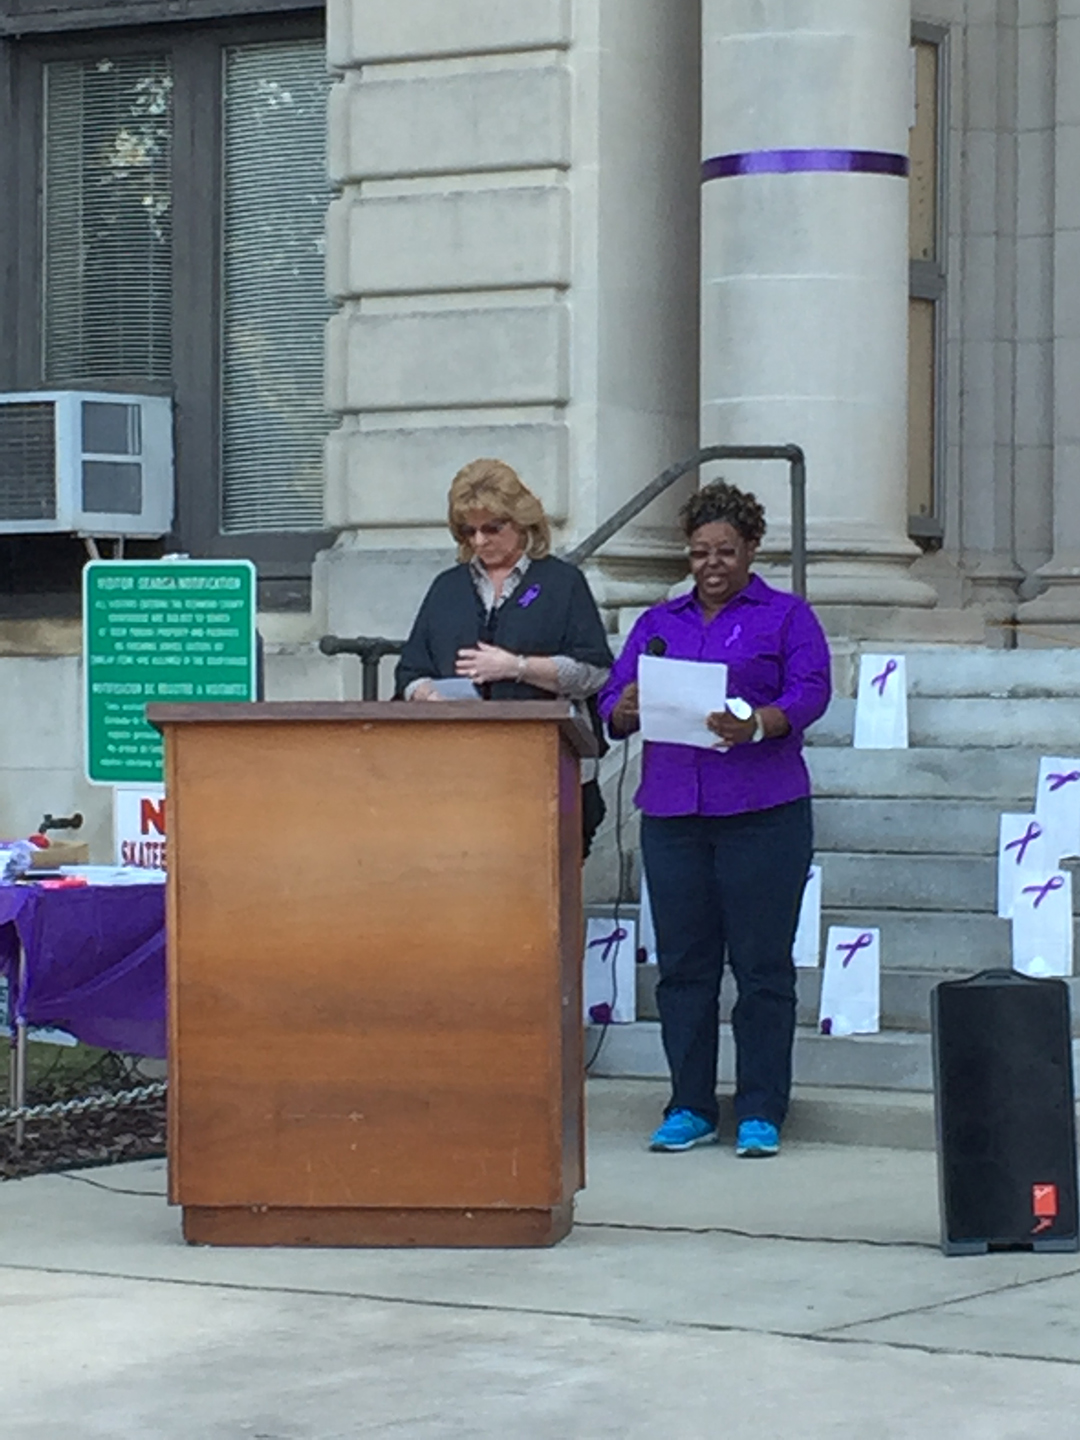 Salley Ingram reads a poem on the steps of the courthouse.